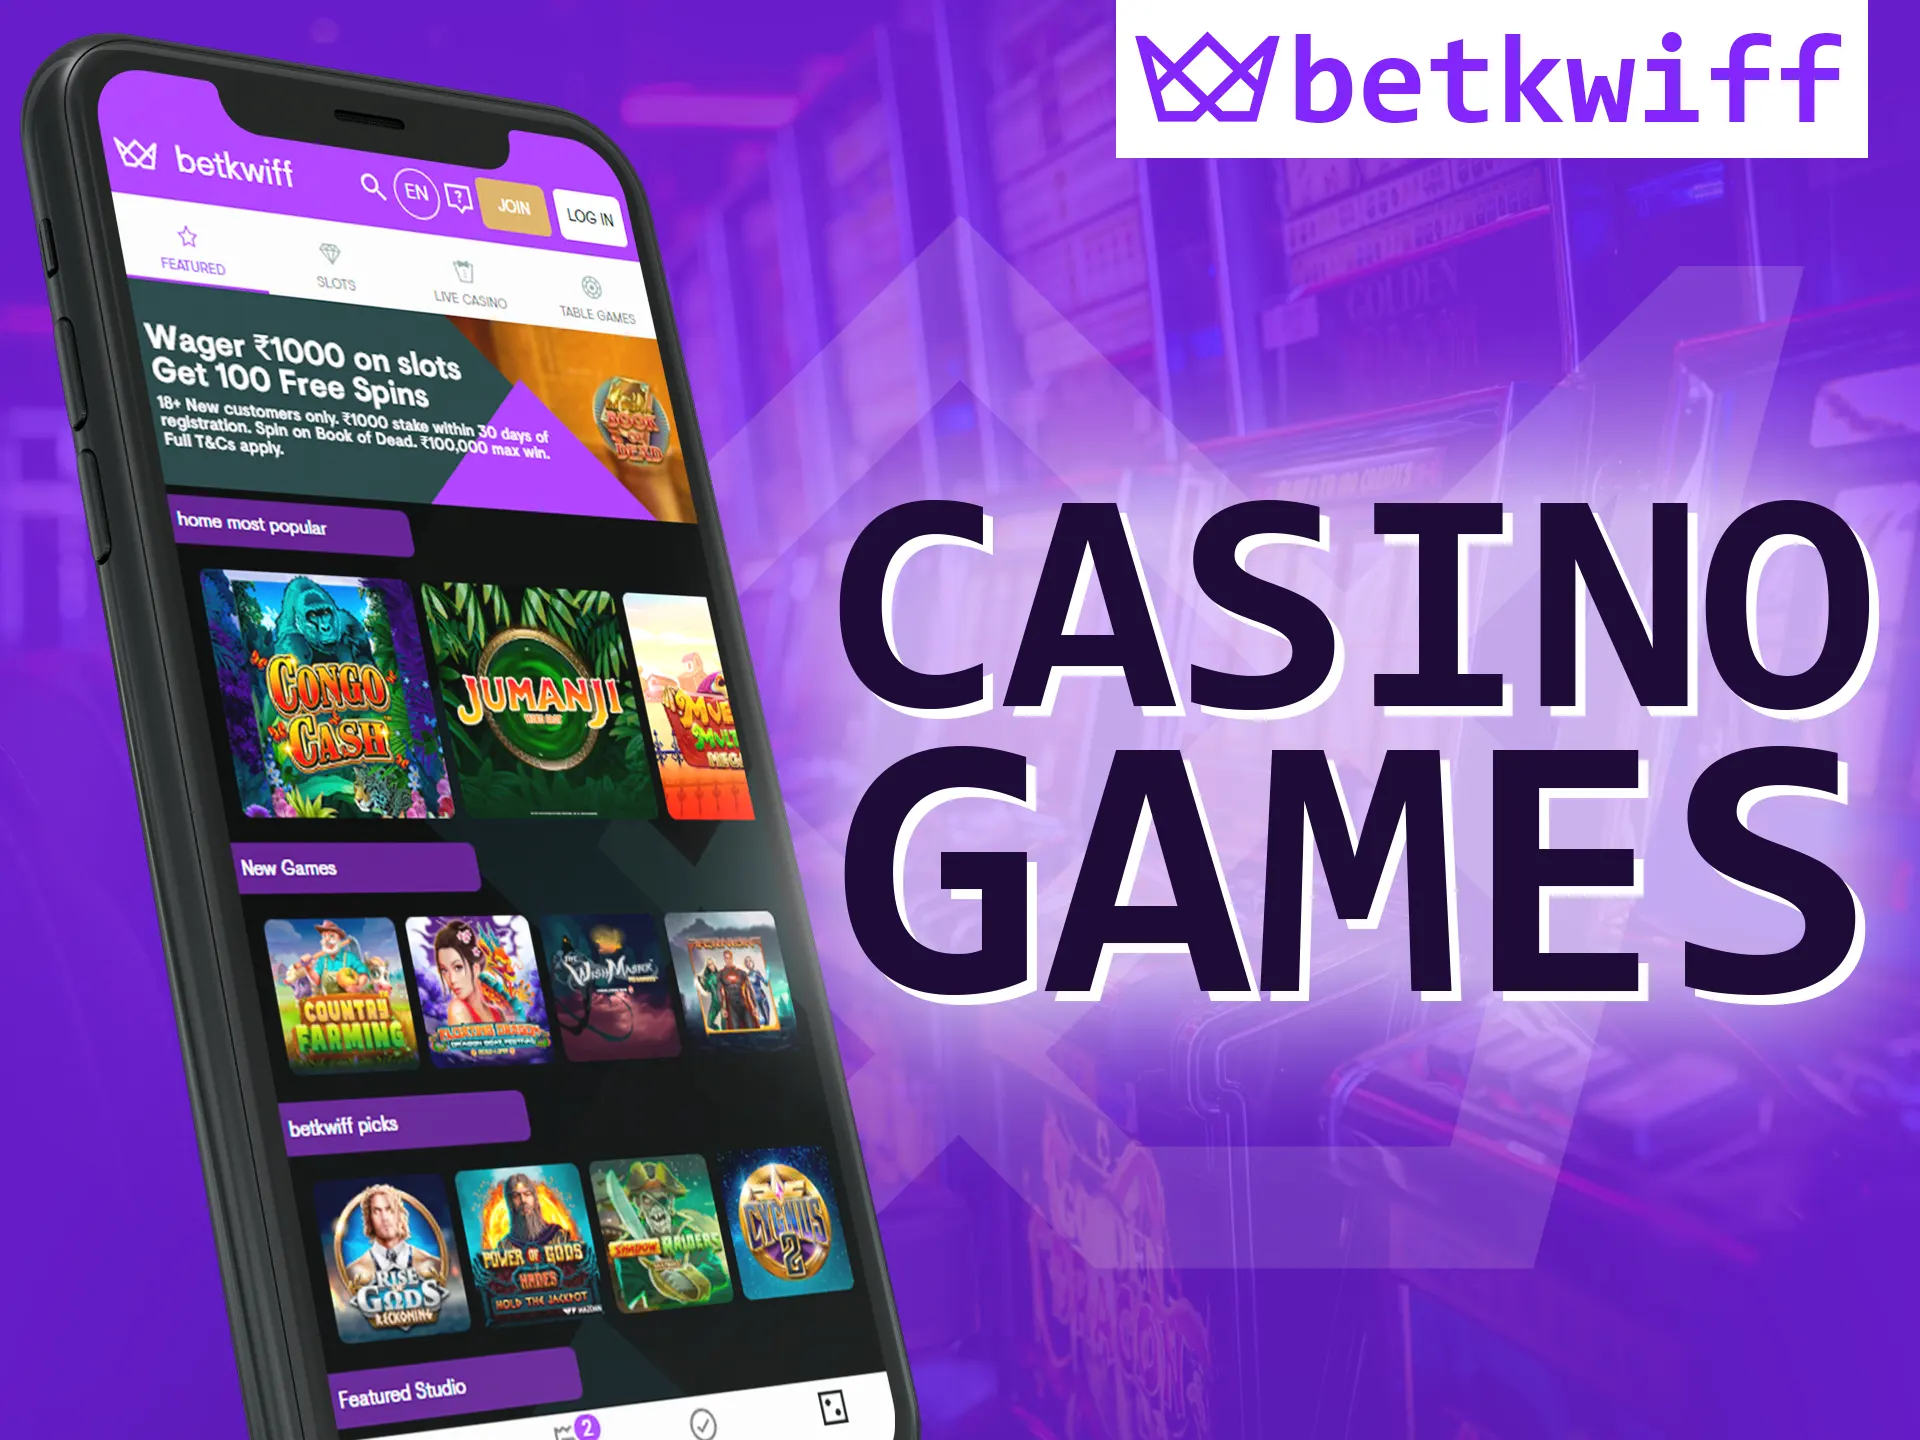 In the Betkwiff app, play a variety of casino games.